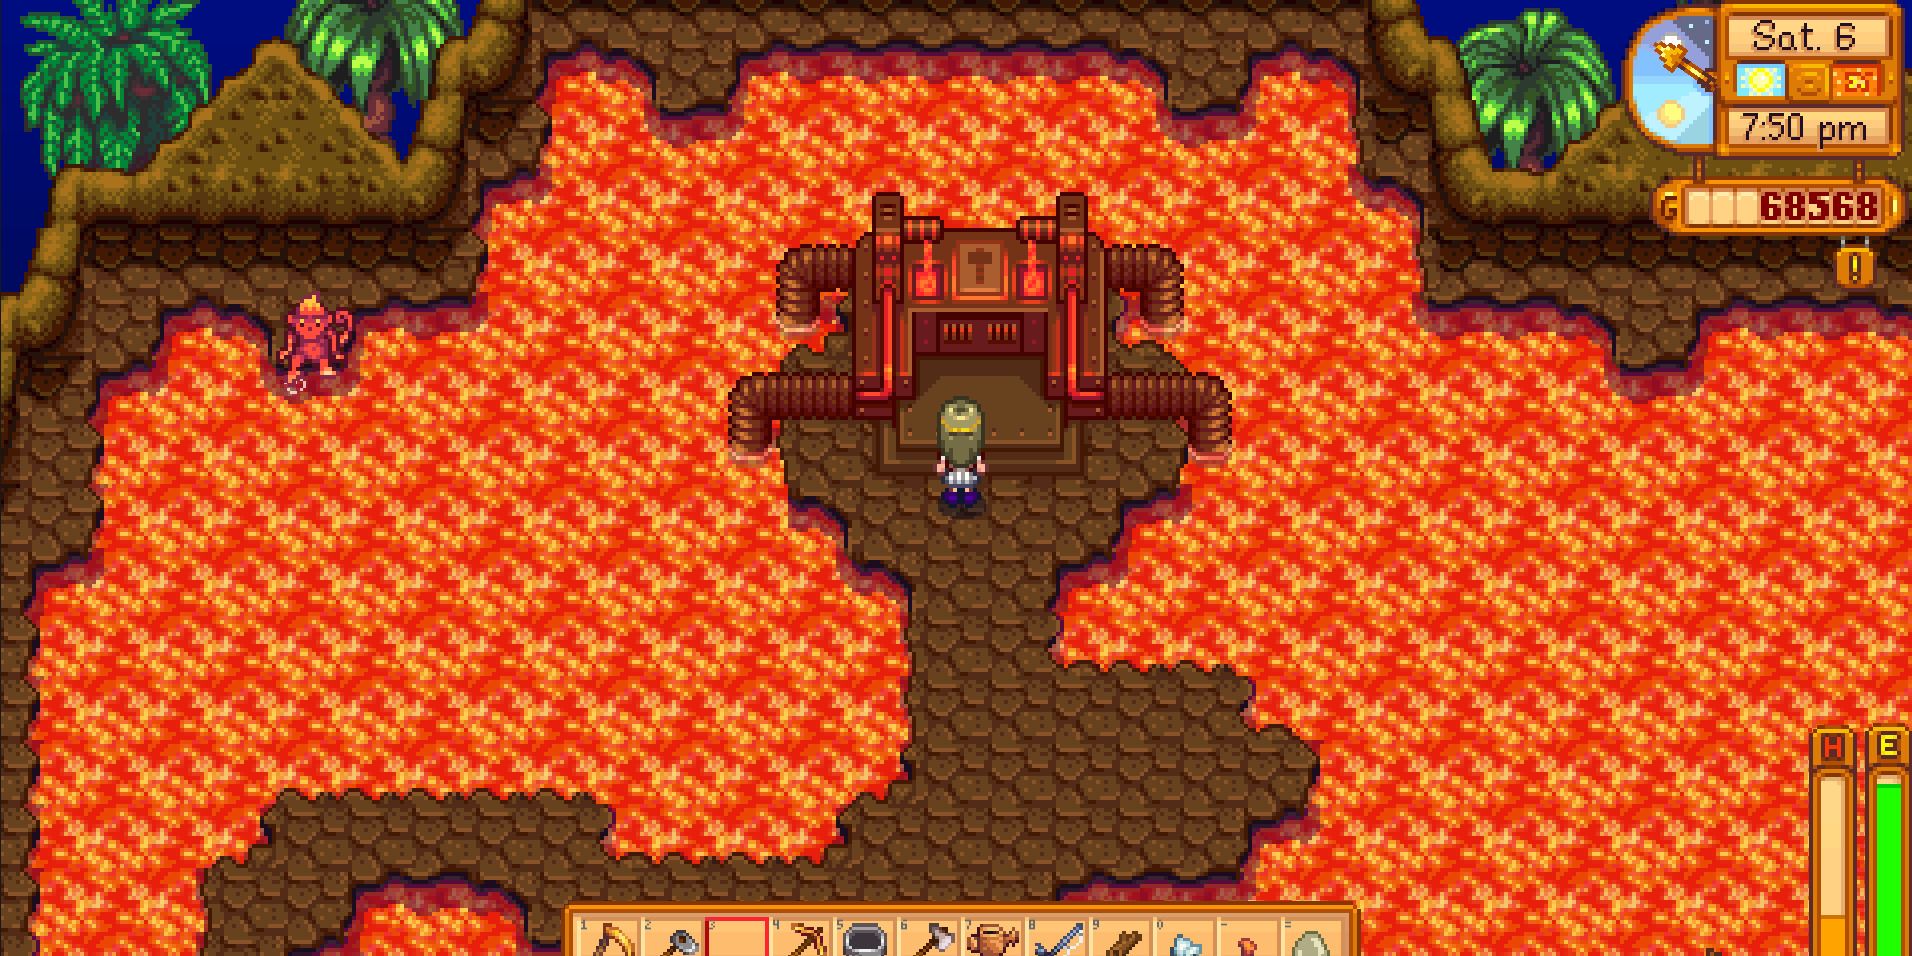 Image of a character standing in front of the Forge in the Volcano Dungeon in Stardew Valley